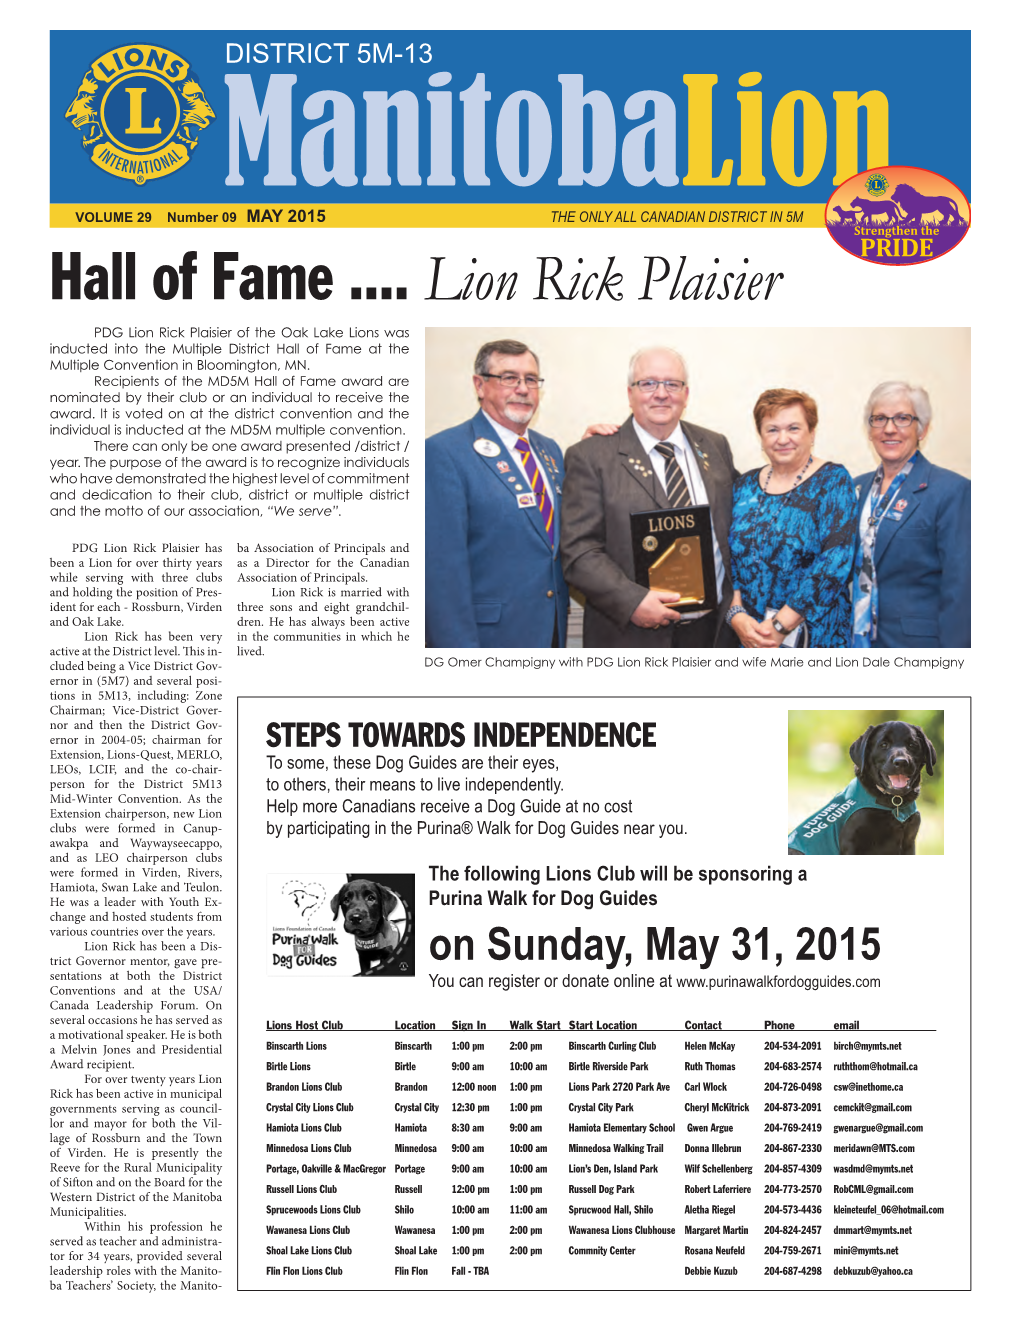 MAY 2015 the ONLY ALL CANADIAN DISTRICT in 5M Hall of Fame